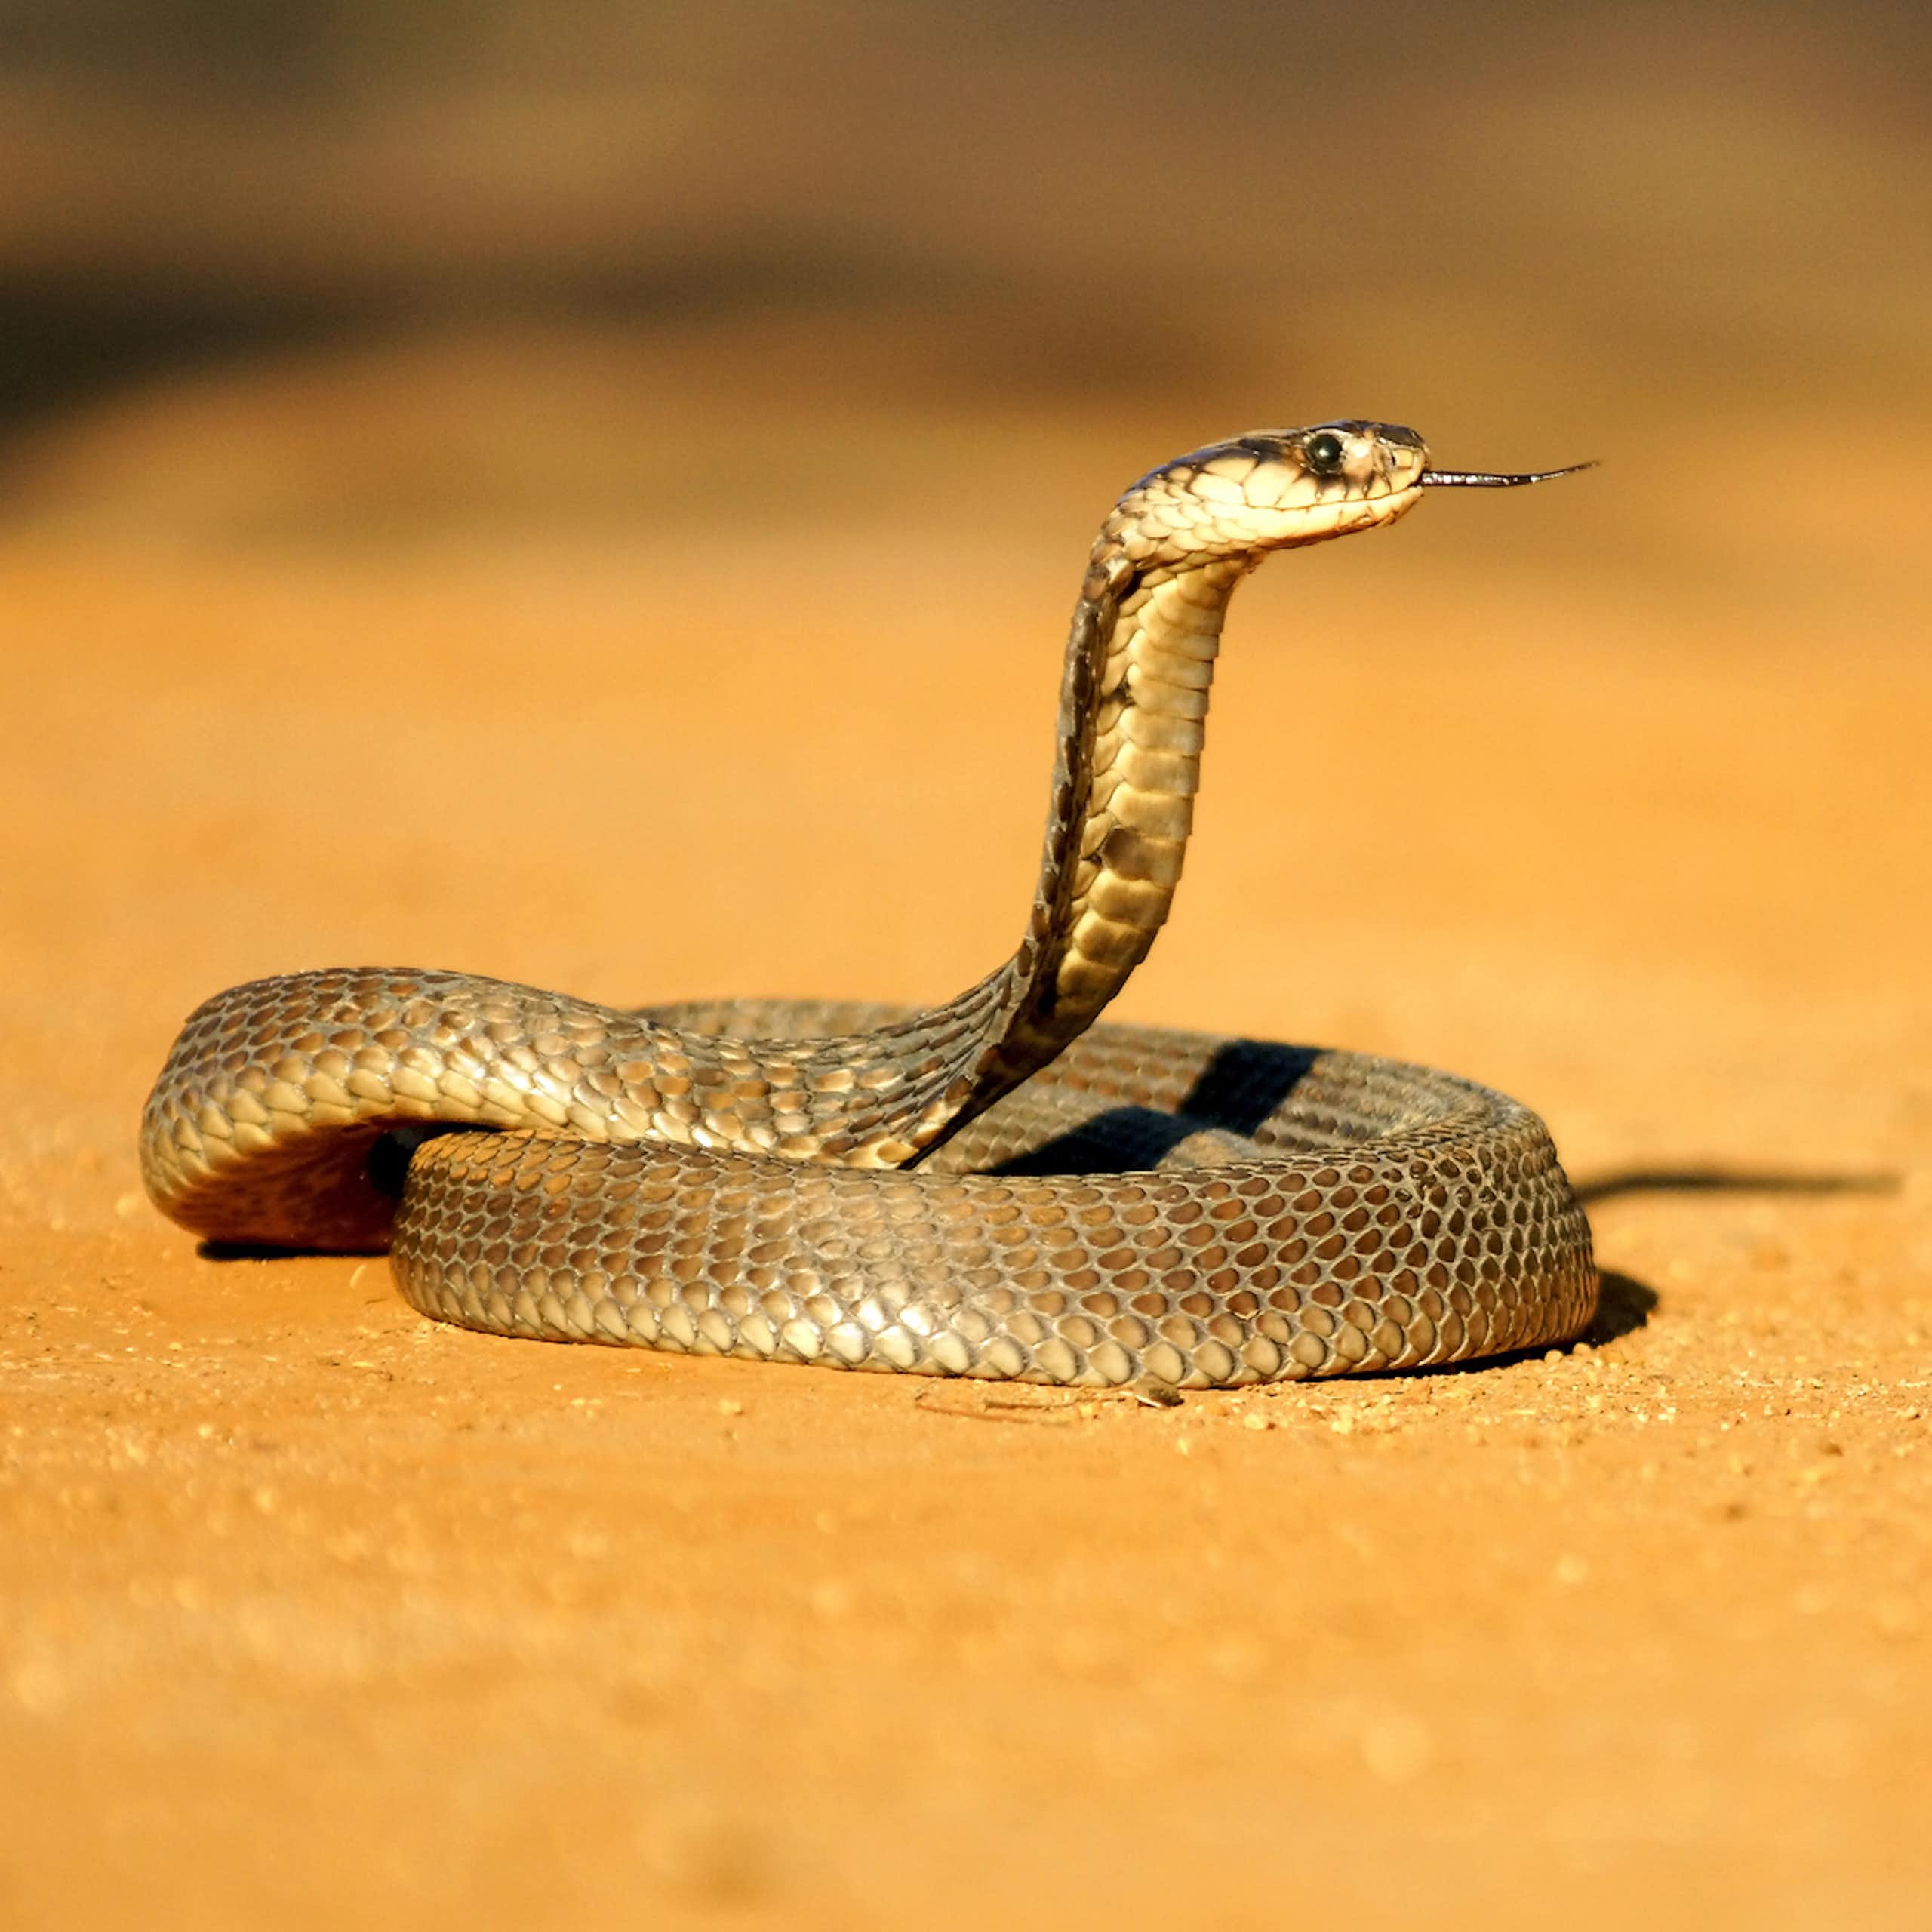 Snakebites can destroy skin, muscle, and even bone – exciting progress on drugs to treat them